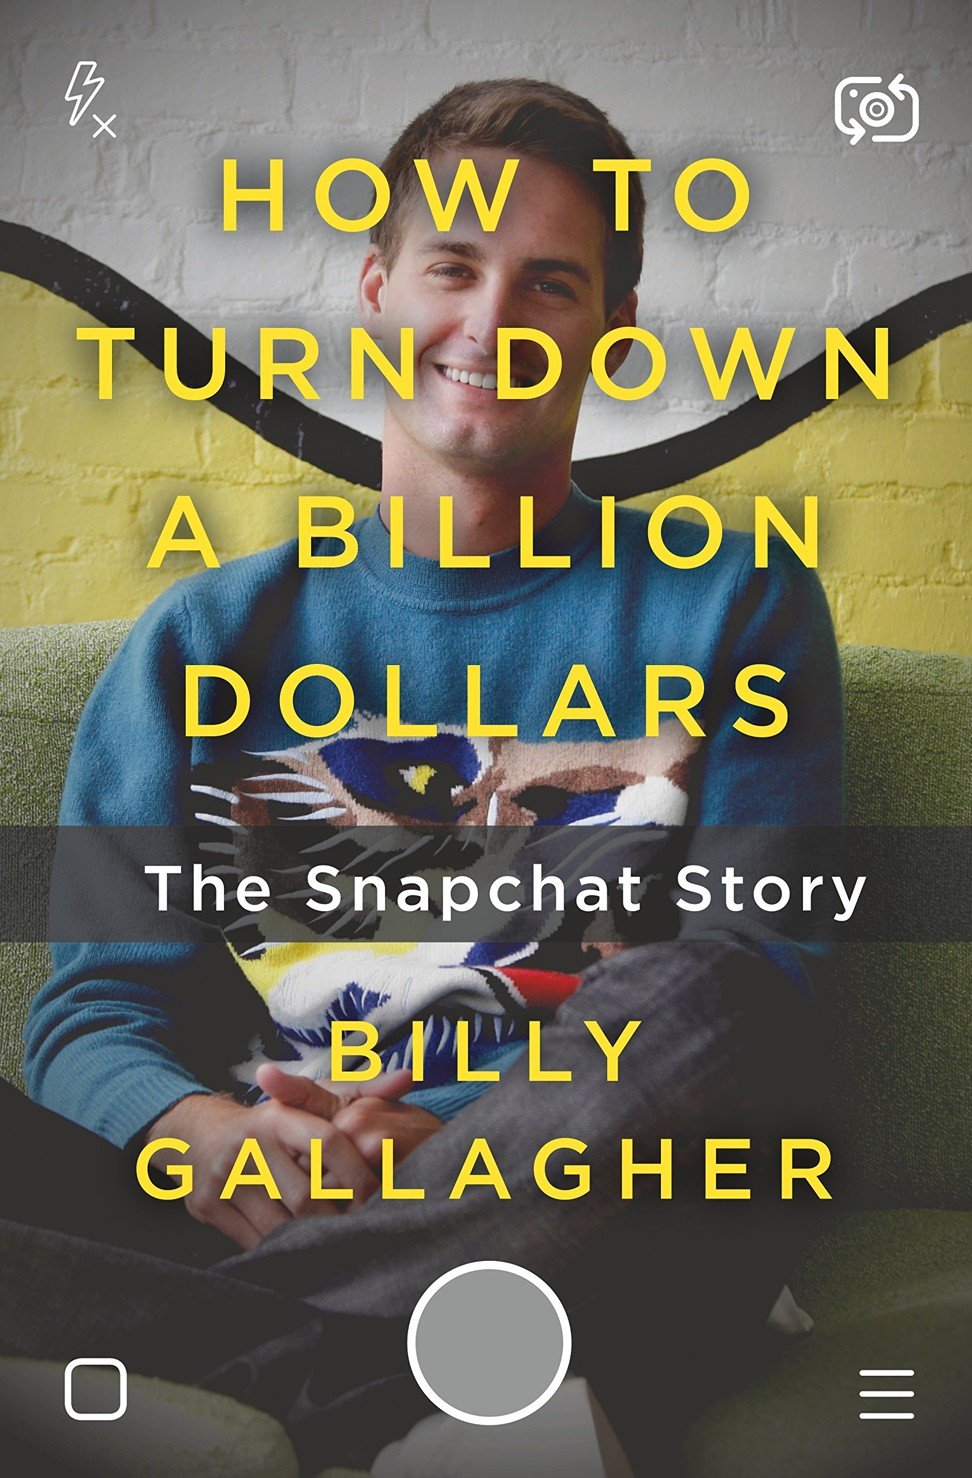 The cover of How To Turn Down a Billion Dollars.